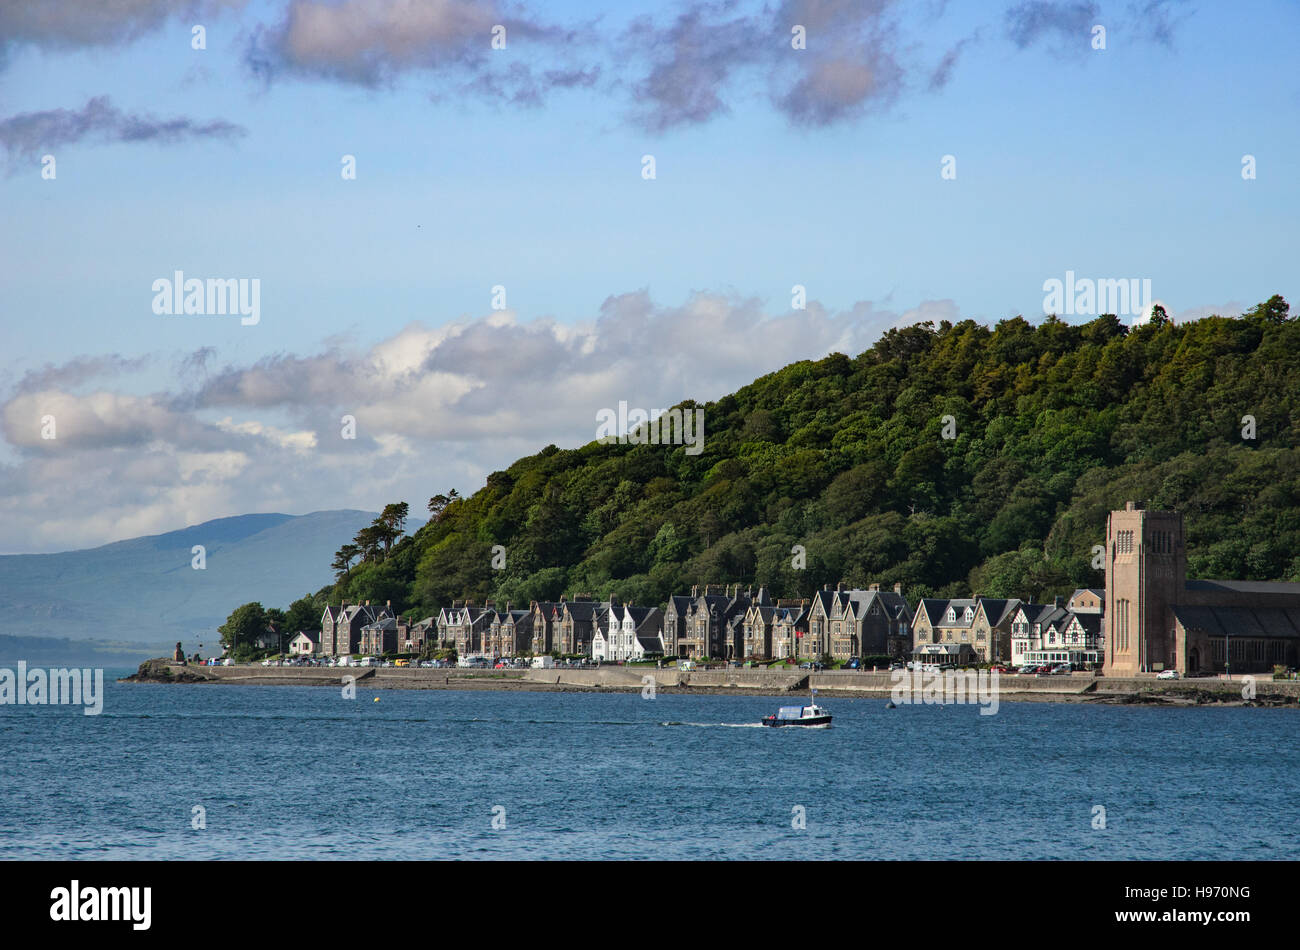 Church and houses on the foot of a hill with forest near the ferry terminal in Oban, Scotland Stock Photo